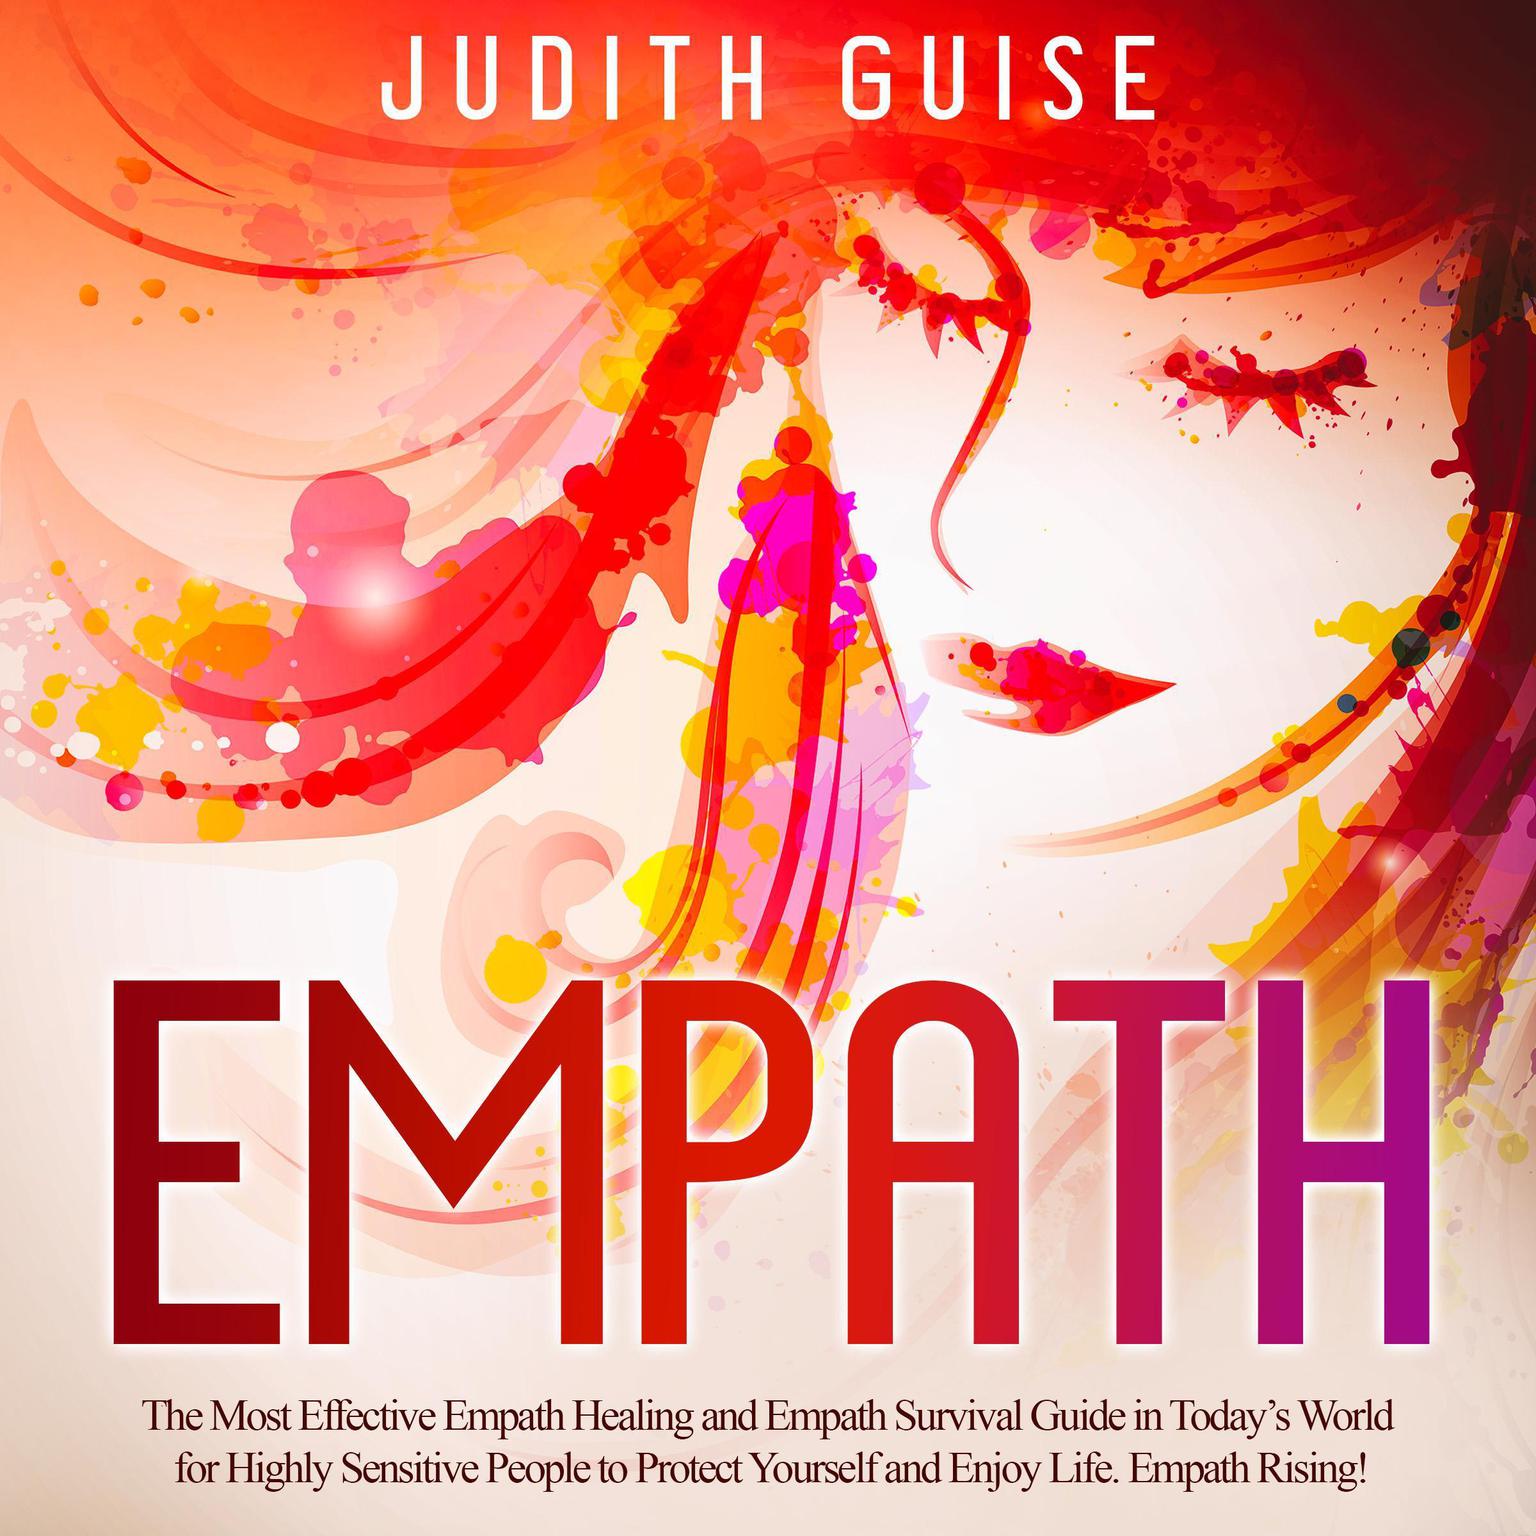 Empath: The Most Effective Empath Healing and Empath Survival Guide in Today’s World for Highly Sensitive People to Protect Yourself and Enjoy Life. Empath Rising!  Audiobook, by Judith Guise